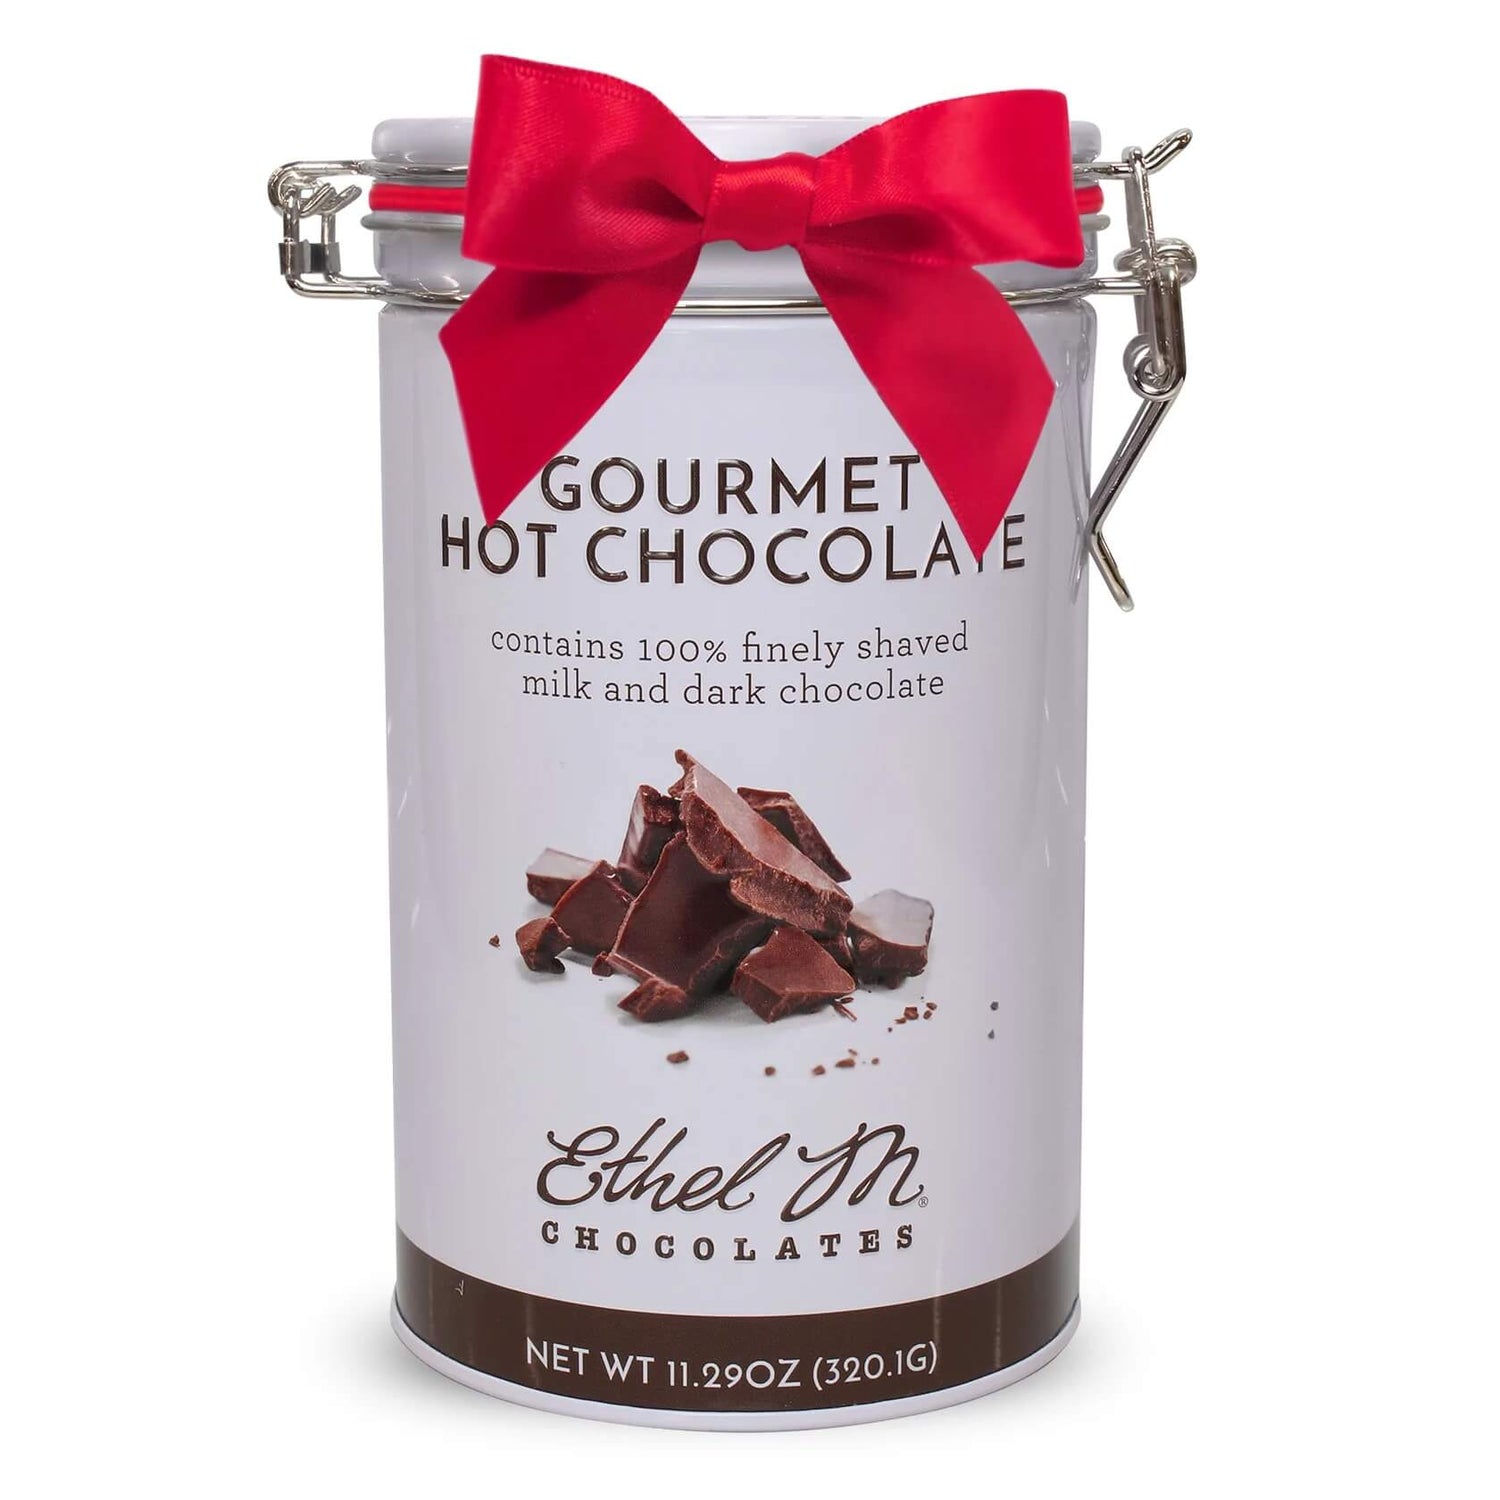 Gourmet Hot Chocolate Perfect for Gifting